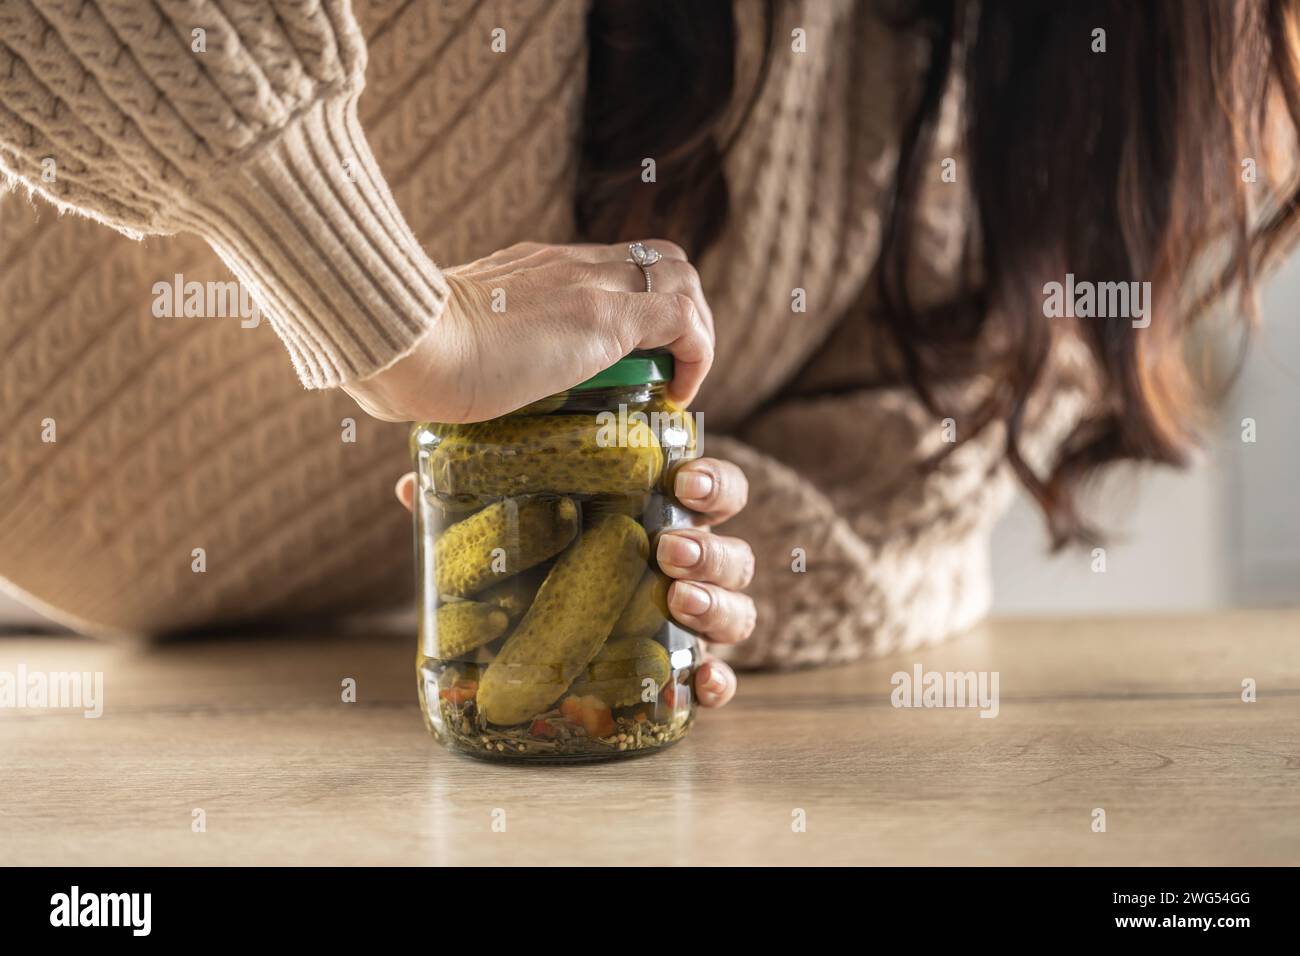 A woman tries to force open a jam jar with cucumbers. Stock Photo